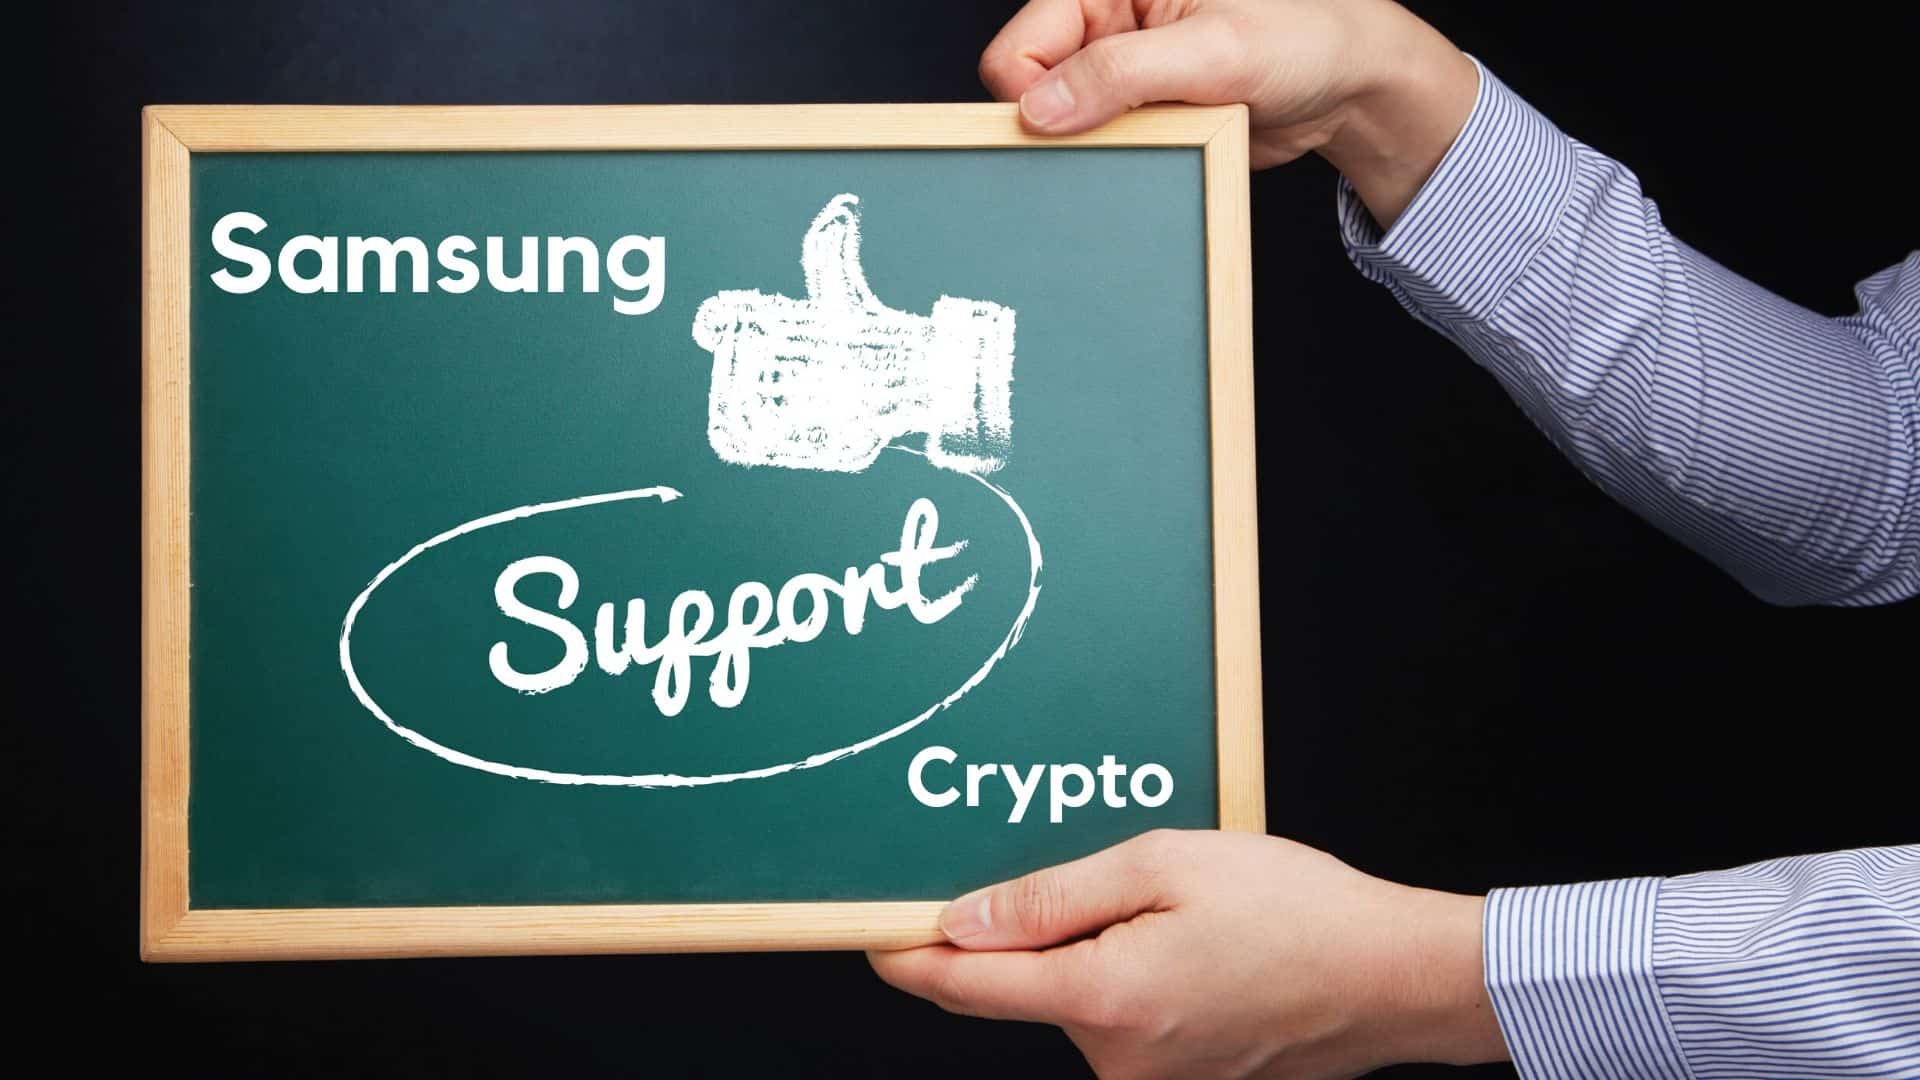 Samsung Continues Support for Crypto